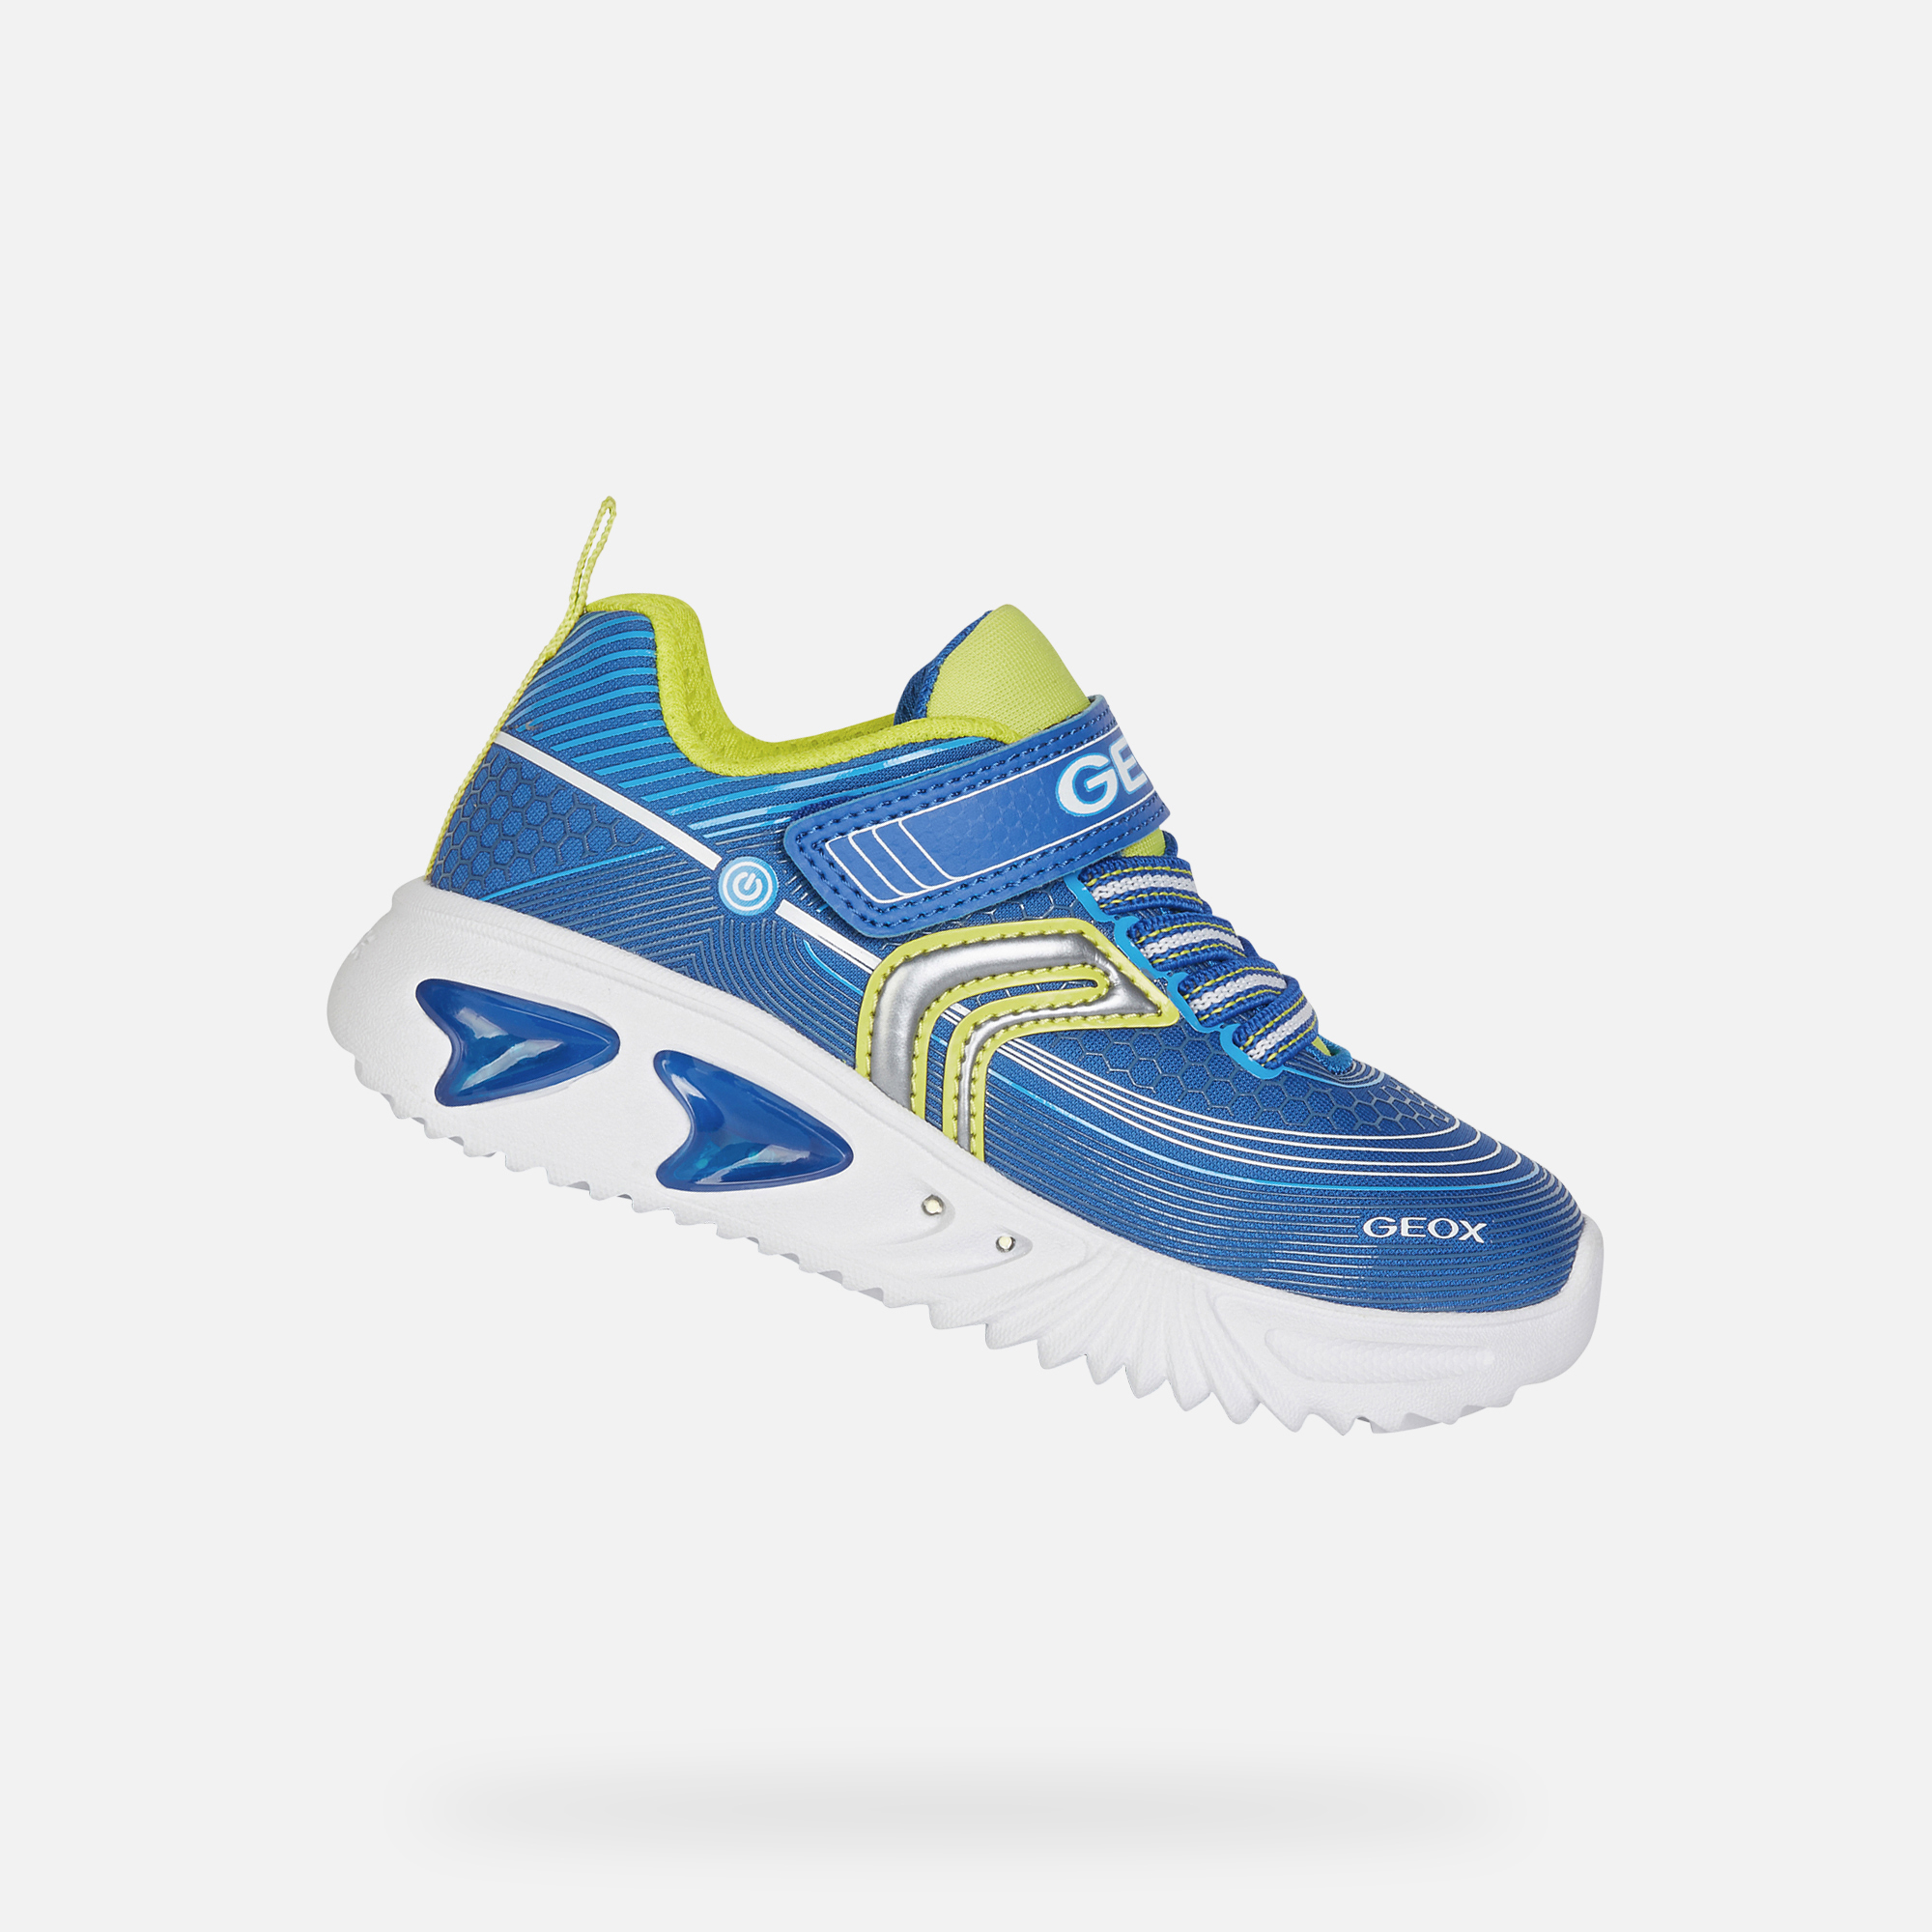 Geox® ASSISTER Junior Boy Royal Sneakers | Geox® SS21